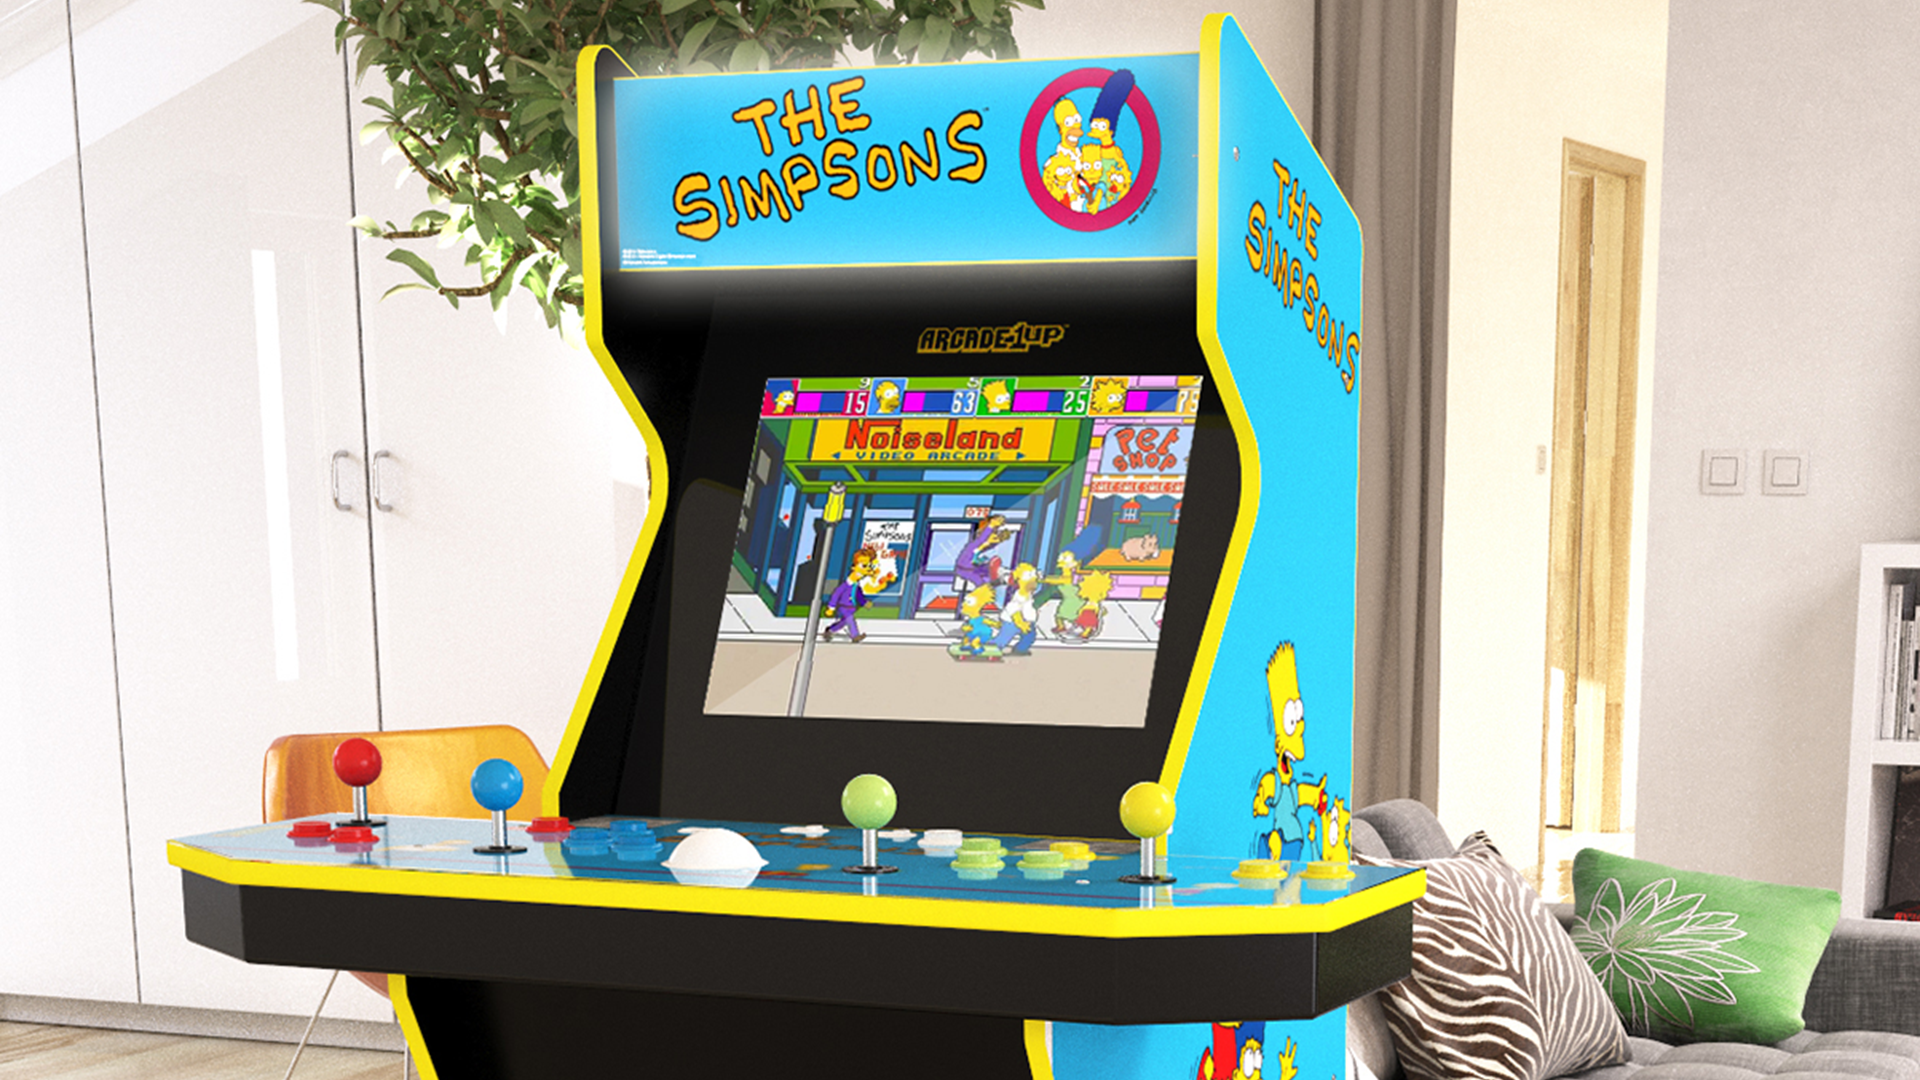 Arcade1Up Heads to Springfield With a New ‘The Simpsons’ Arcade